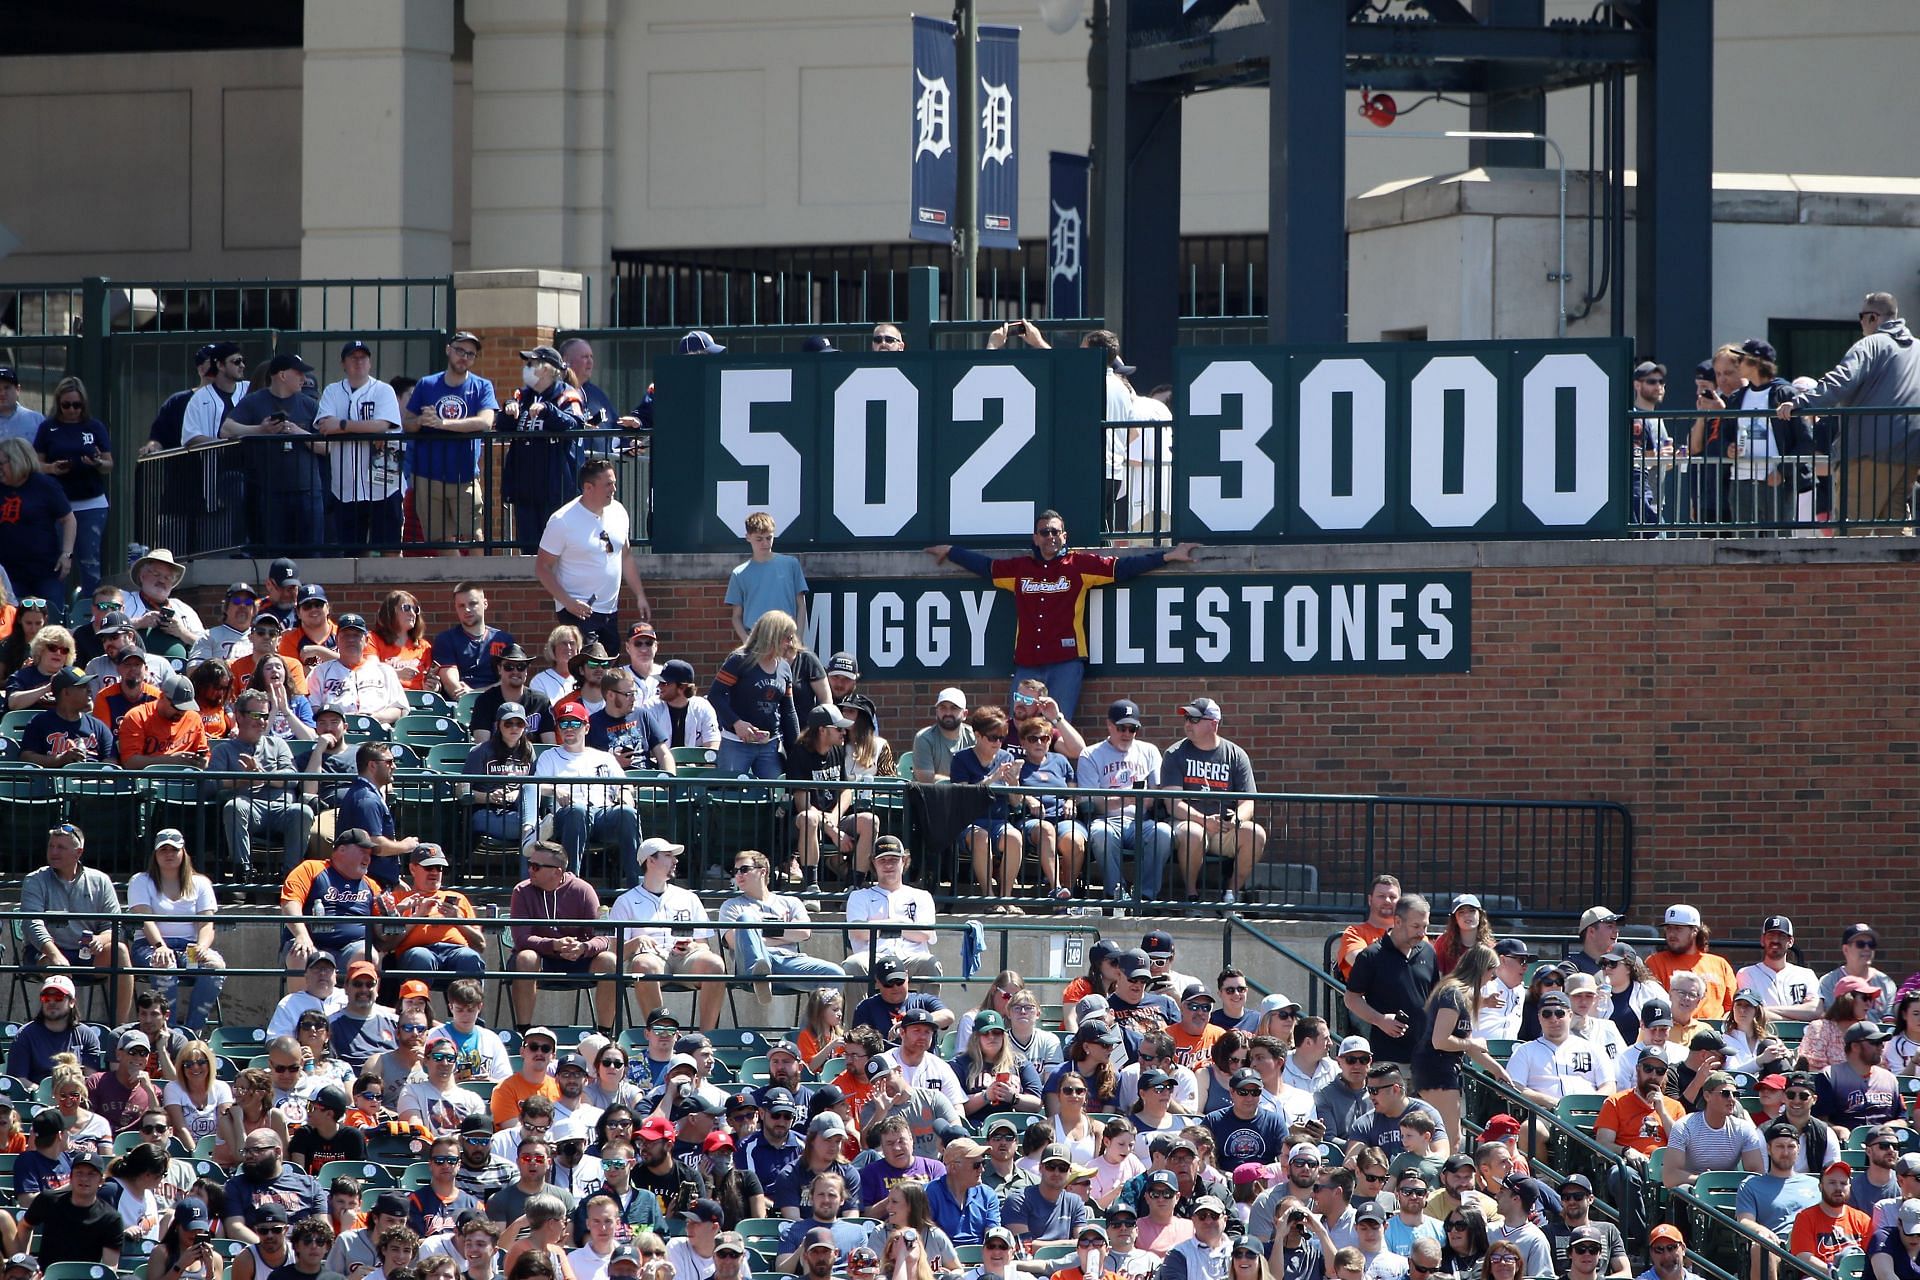 3,000 hit club: A closer look at Miguel Cabrera's Hall of Fame